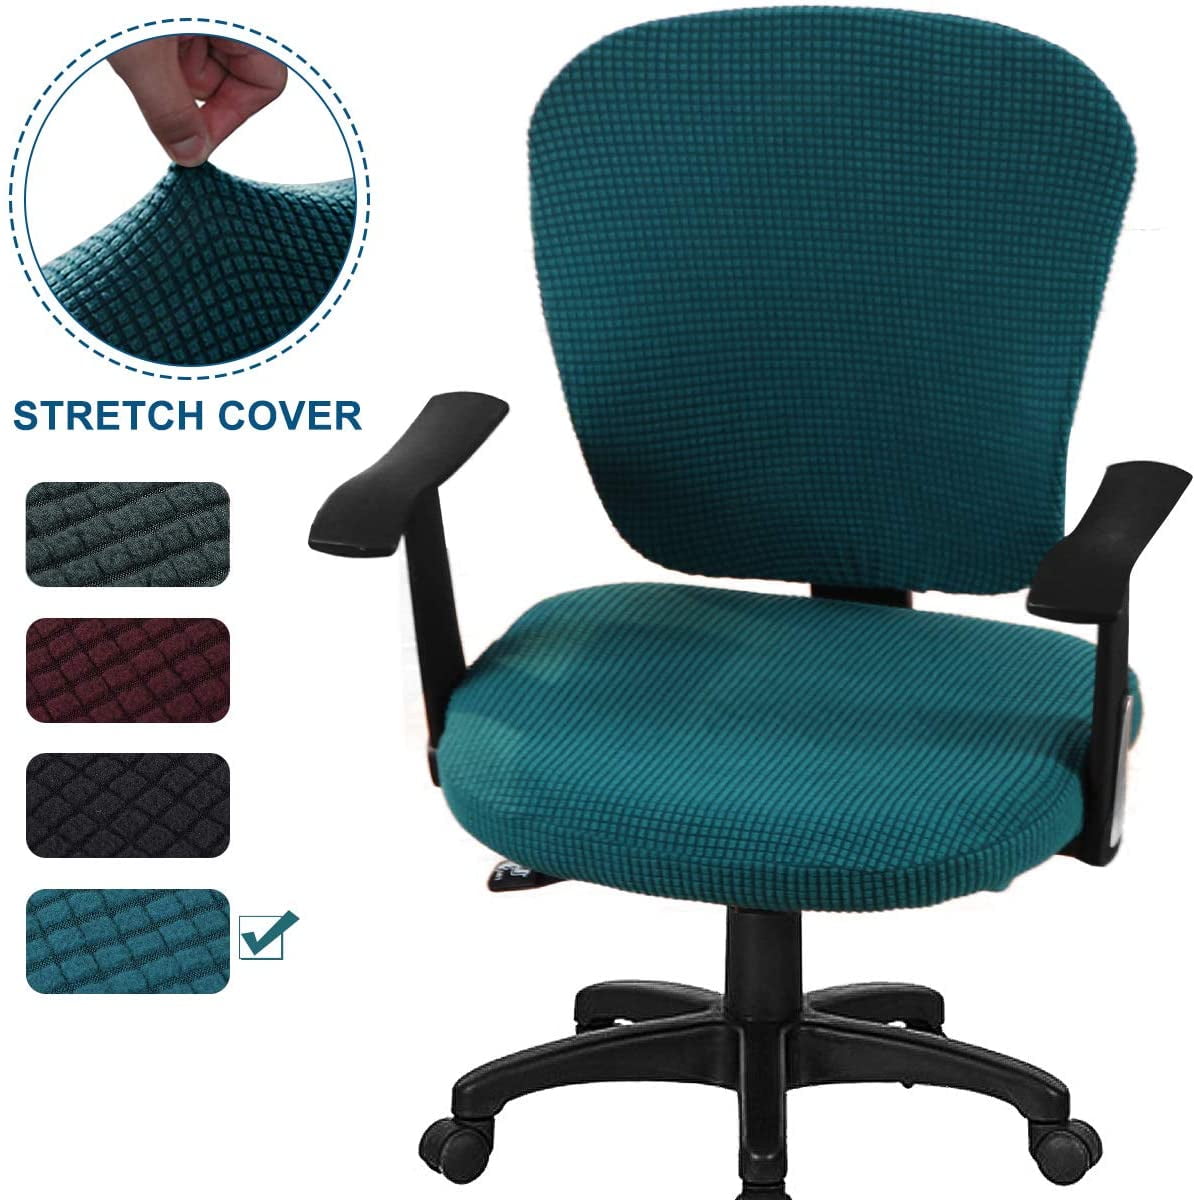 Universal Office Computer Rotating Chair Slipcover Protective Stretch Seat Cover 